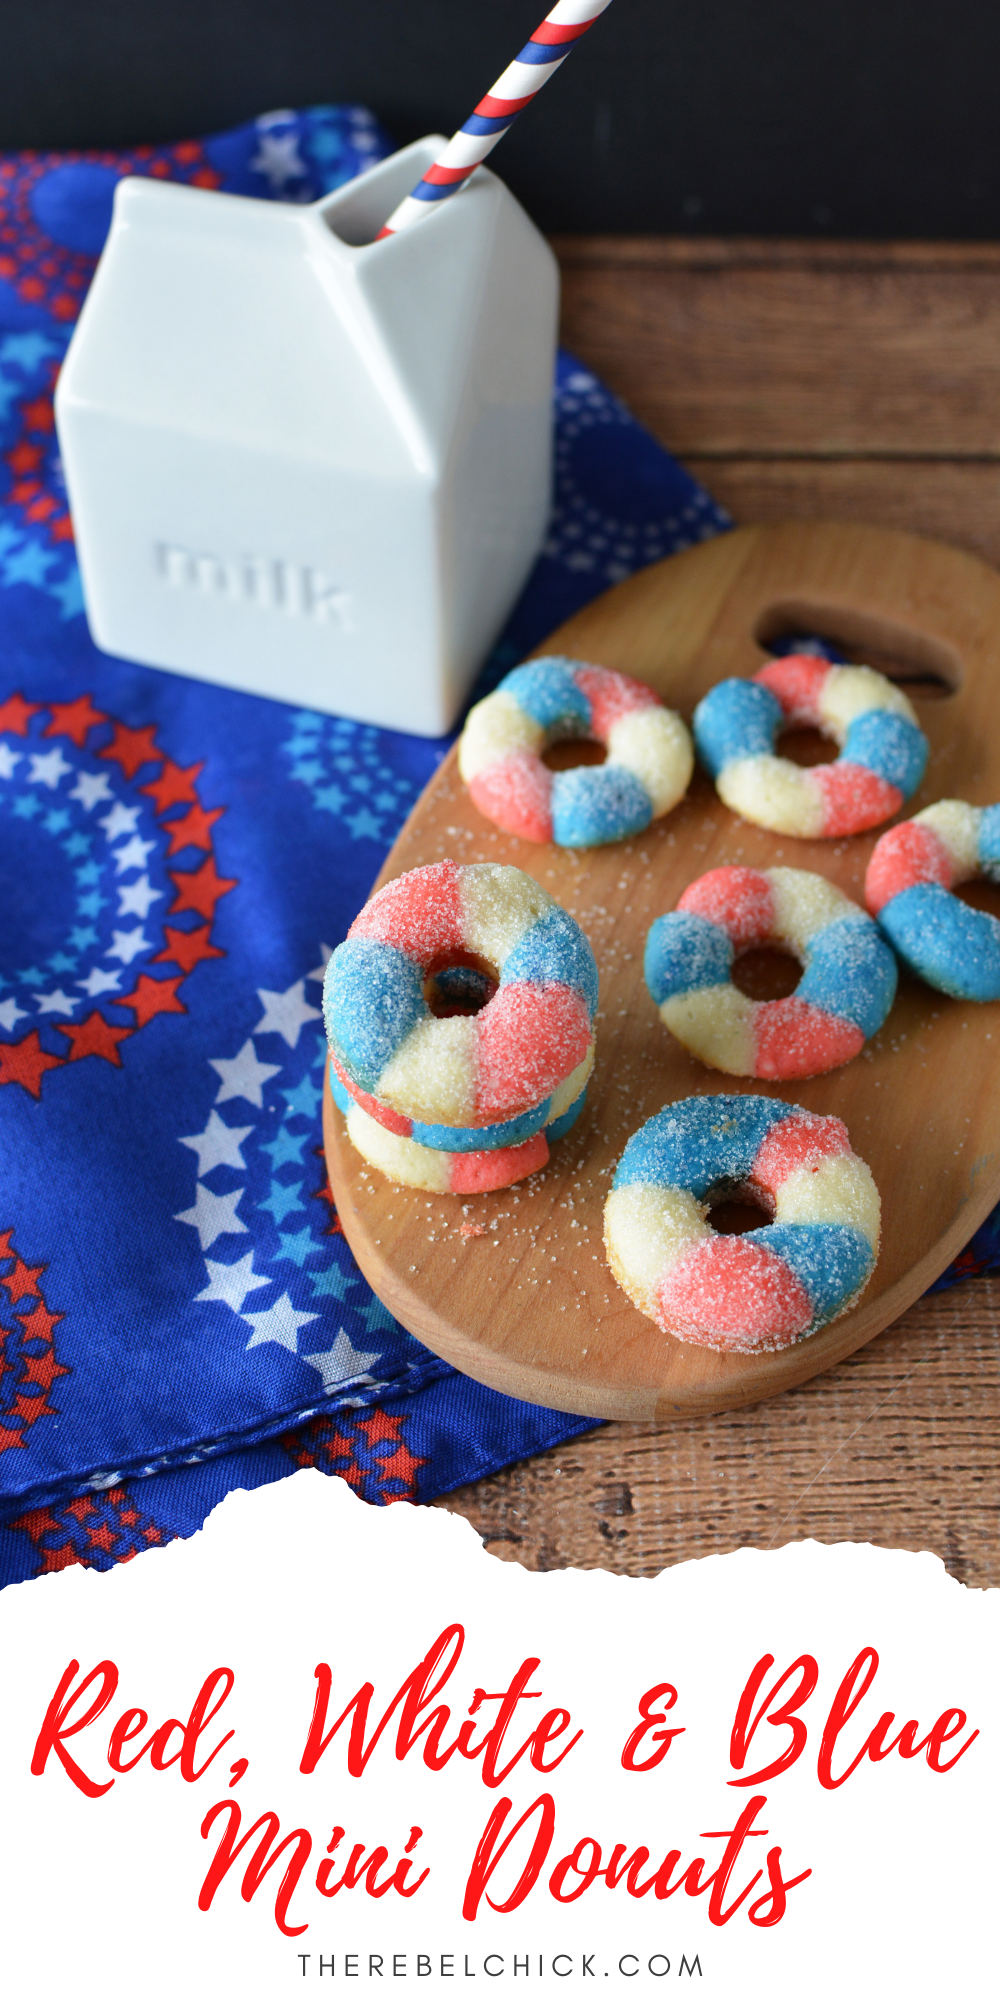 Red, White & Blue Donuts Recipe